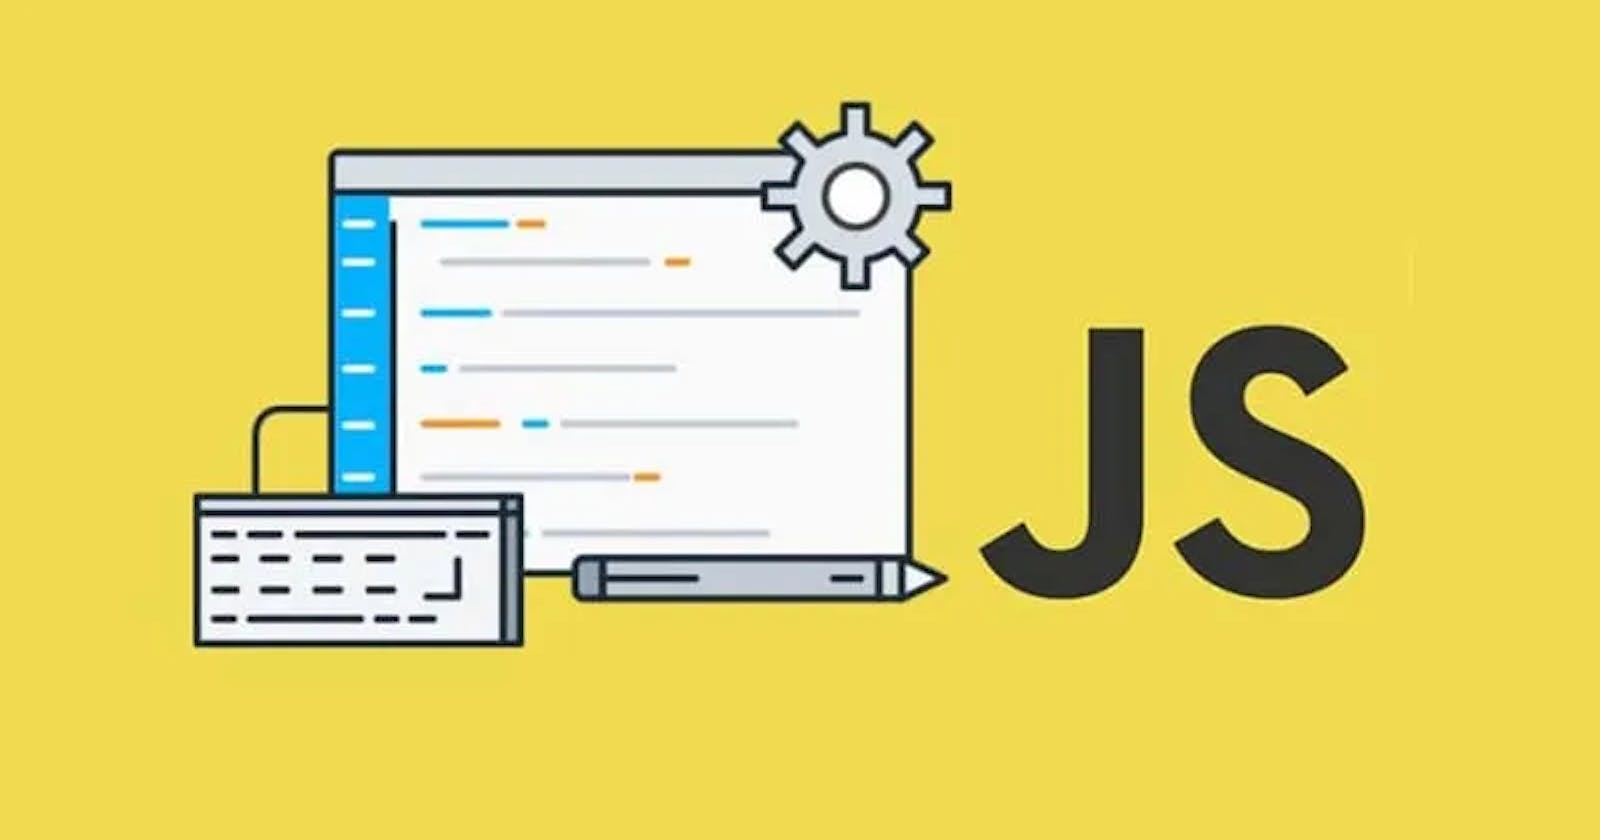 Why JavaScript is confusing?, Learn it by knowing the difference